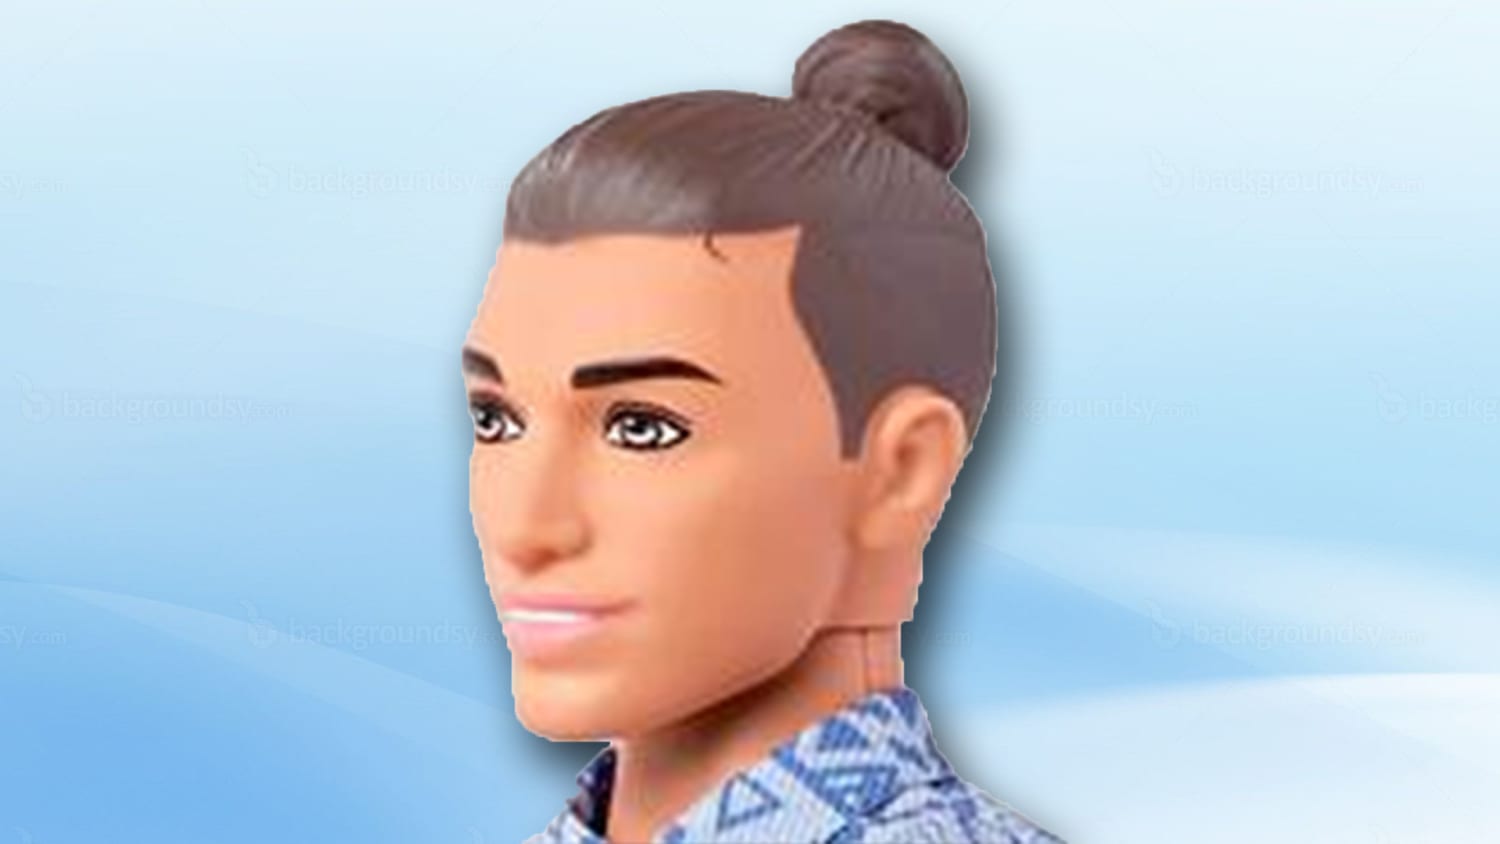 ken doll hairstyle